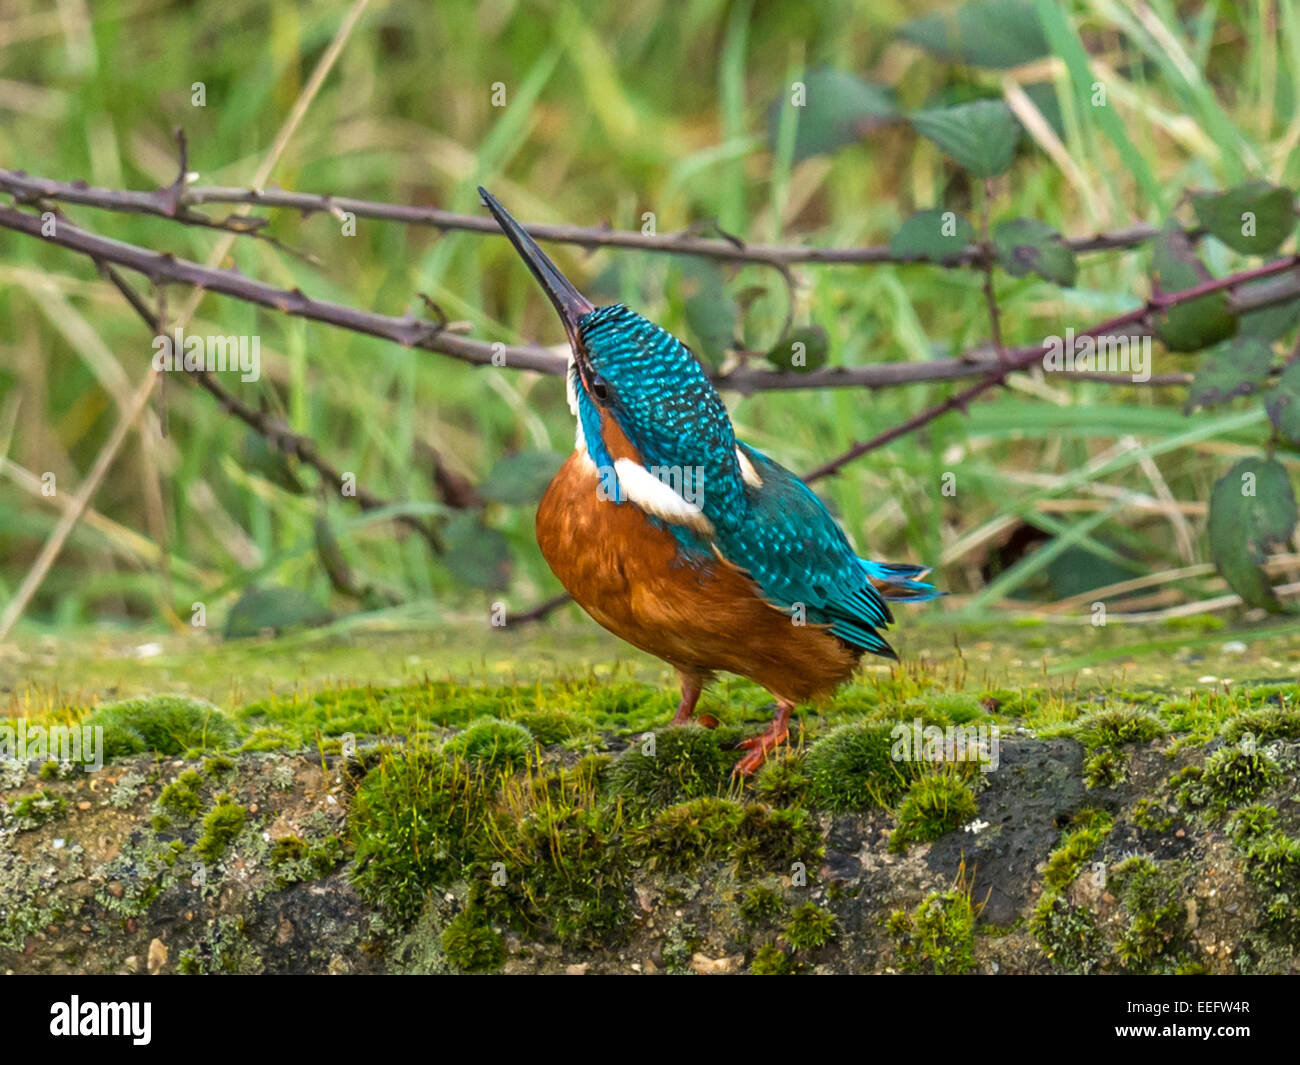 British wildlife, Eurasian Kingfisher [Alcedo atthis] perched on a mossy outcrop Stock Photo